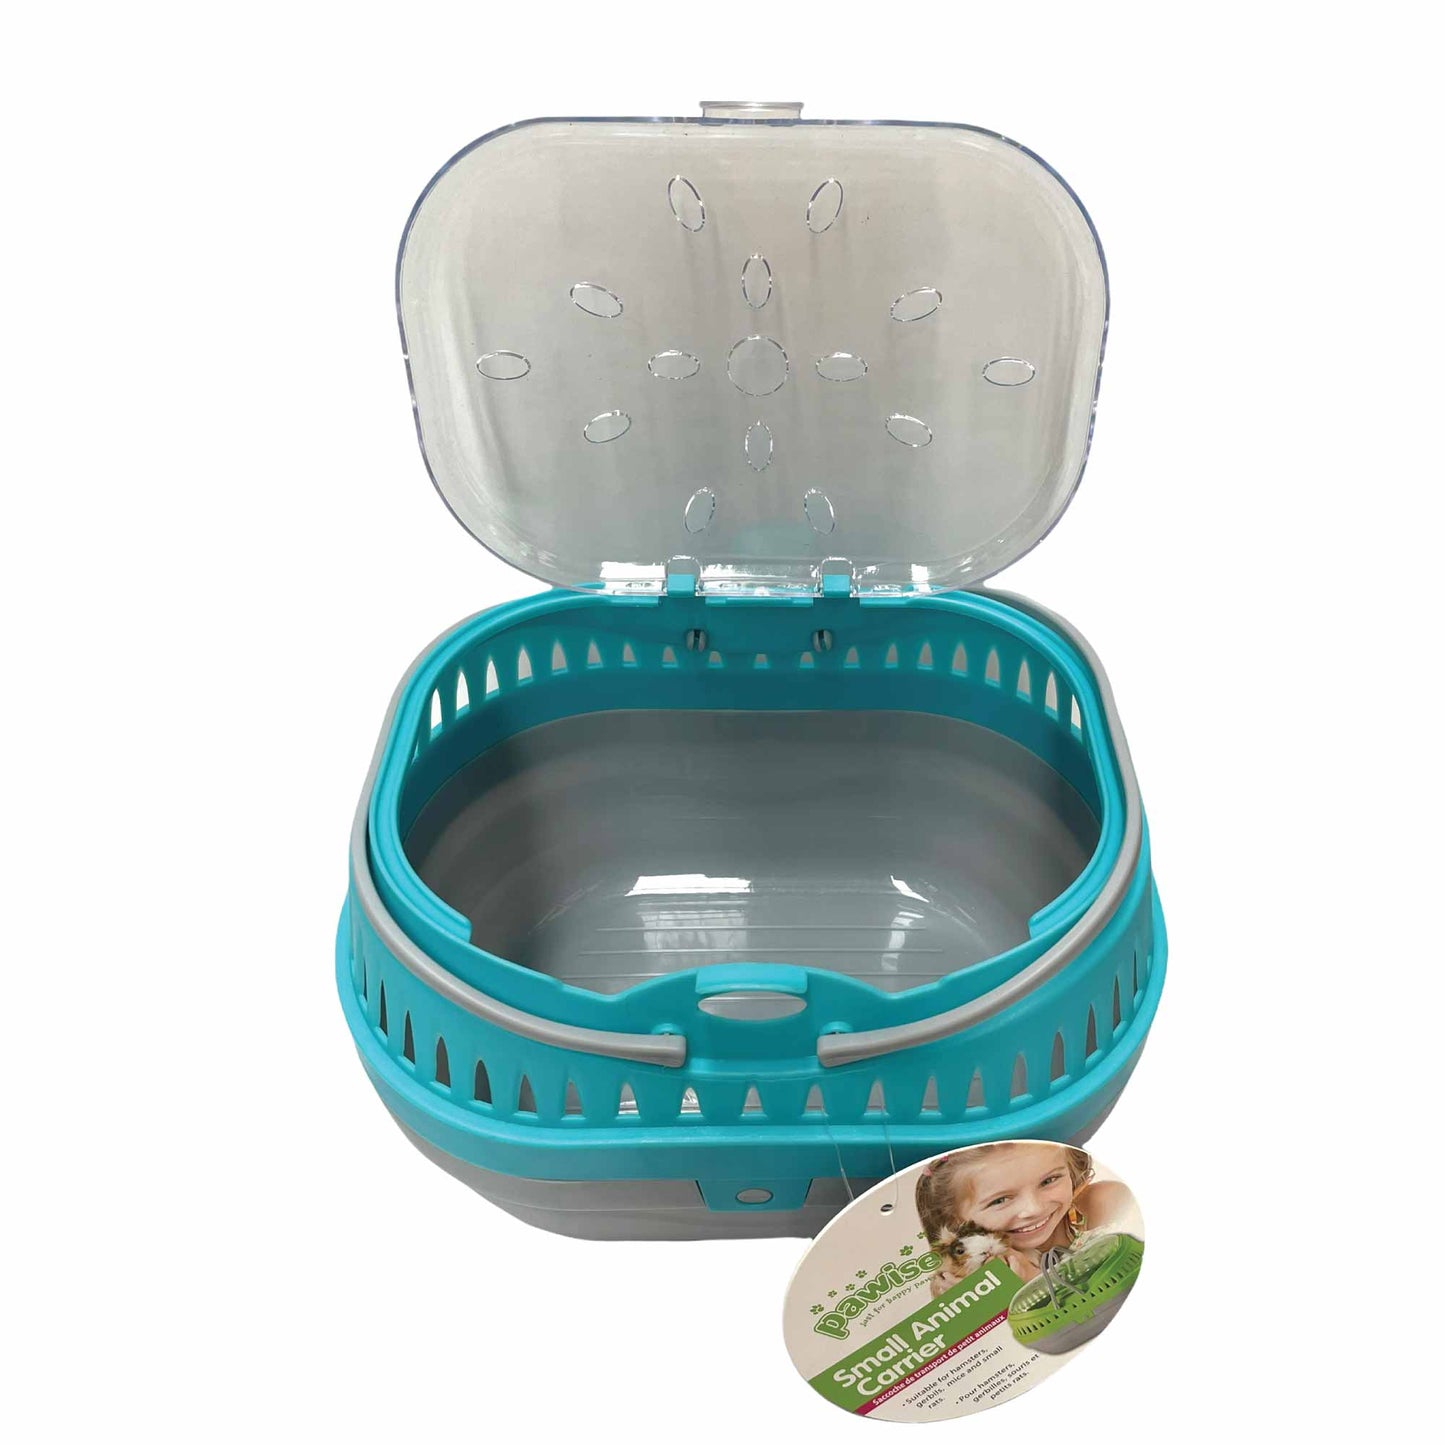 Animal Carrier For Small Pet - Blue Plastic Guinea Pig Mouse Hamster Travel Cage